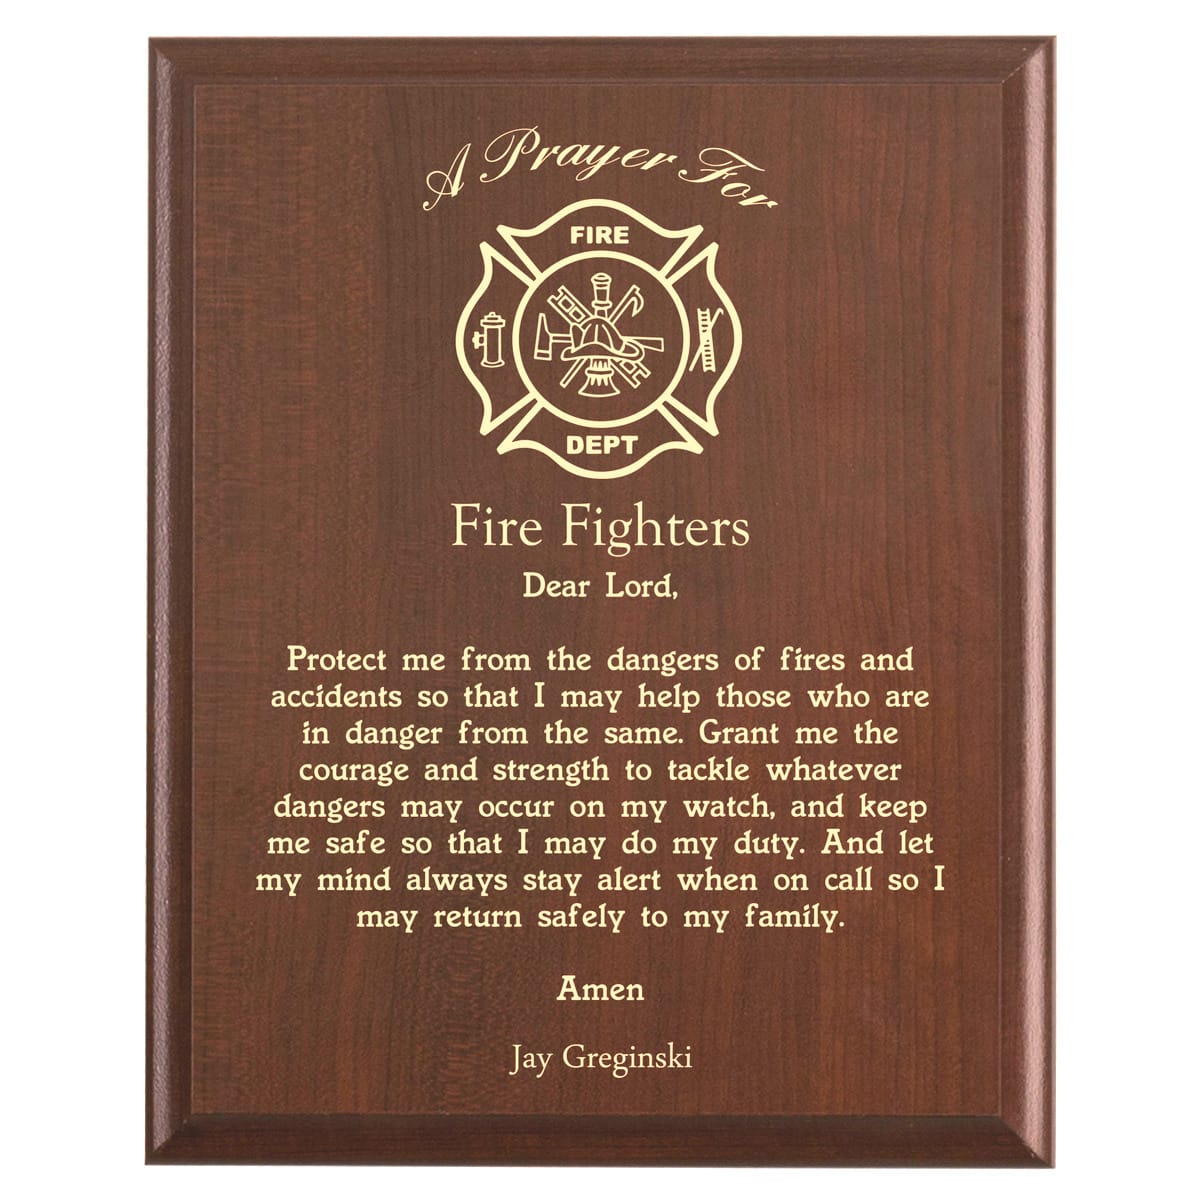 Plaque photo: Firefighter Prayer Plaque design with free personalization. Wood style finish with customized text.